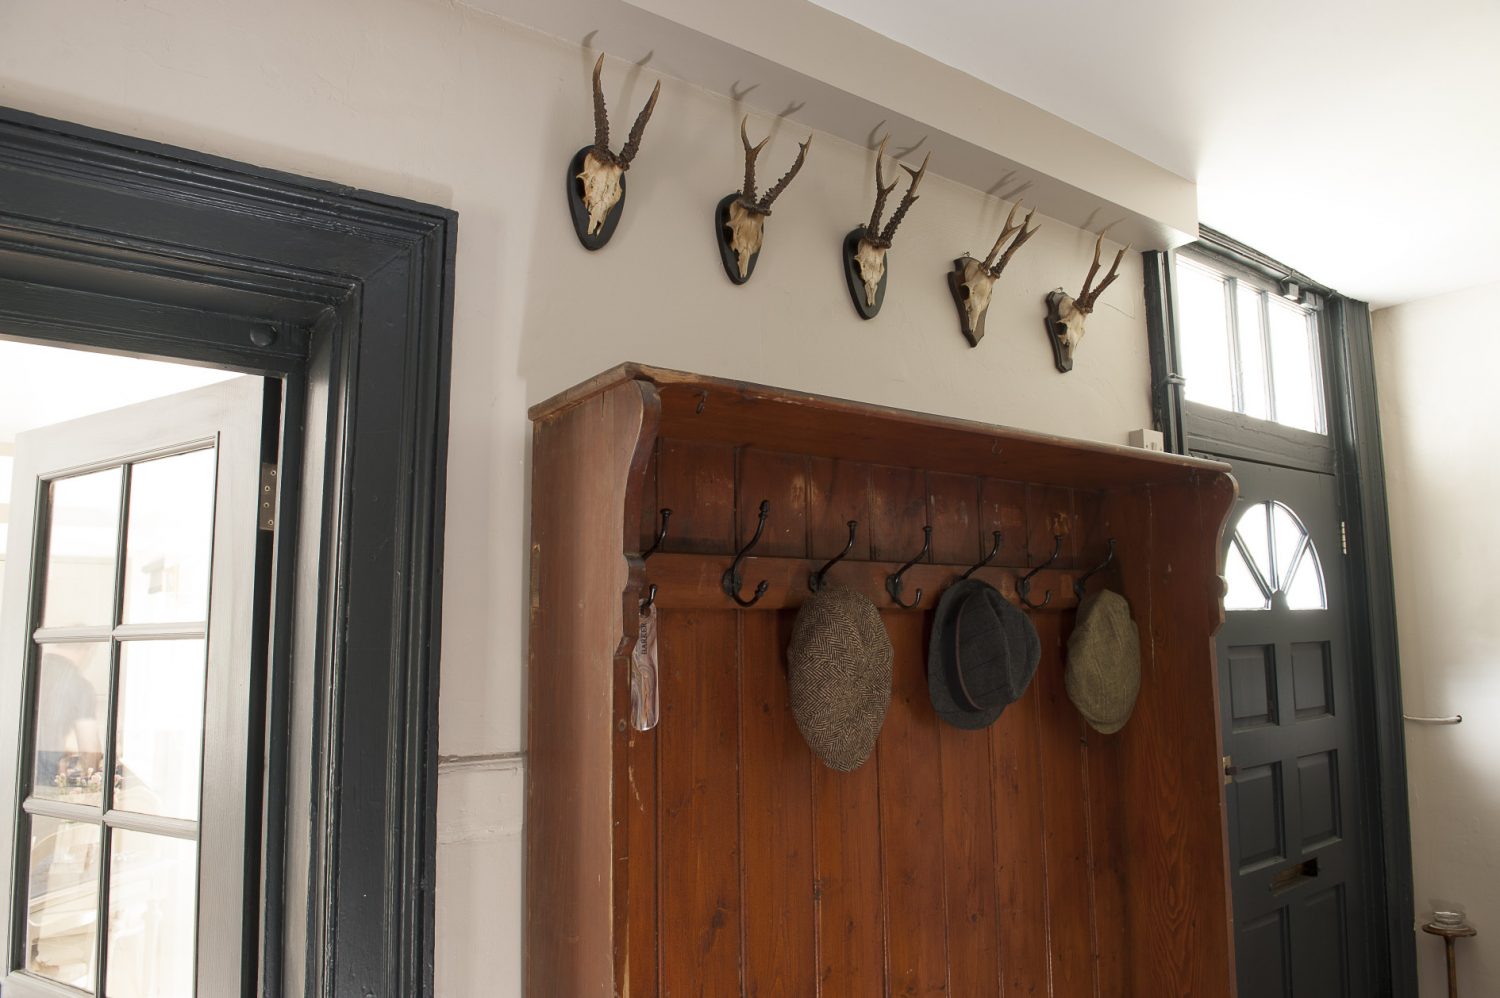 A collection of tweed flat caps adorn the pegs in the rear hallway – ready and waiting for a walk in the surrounding countryside. The couple are happy to arrange guided walks for visitors